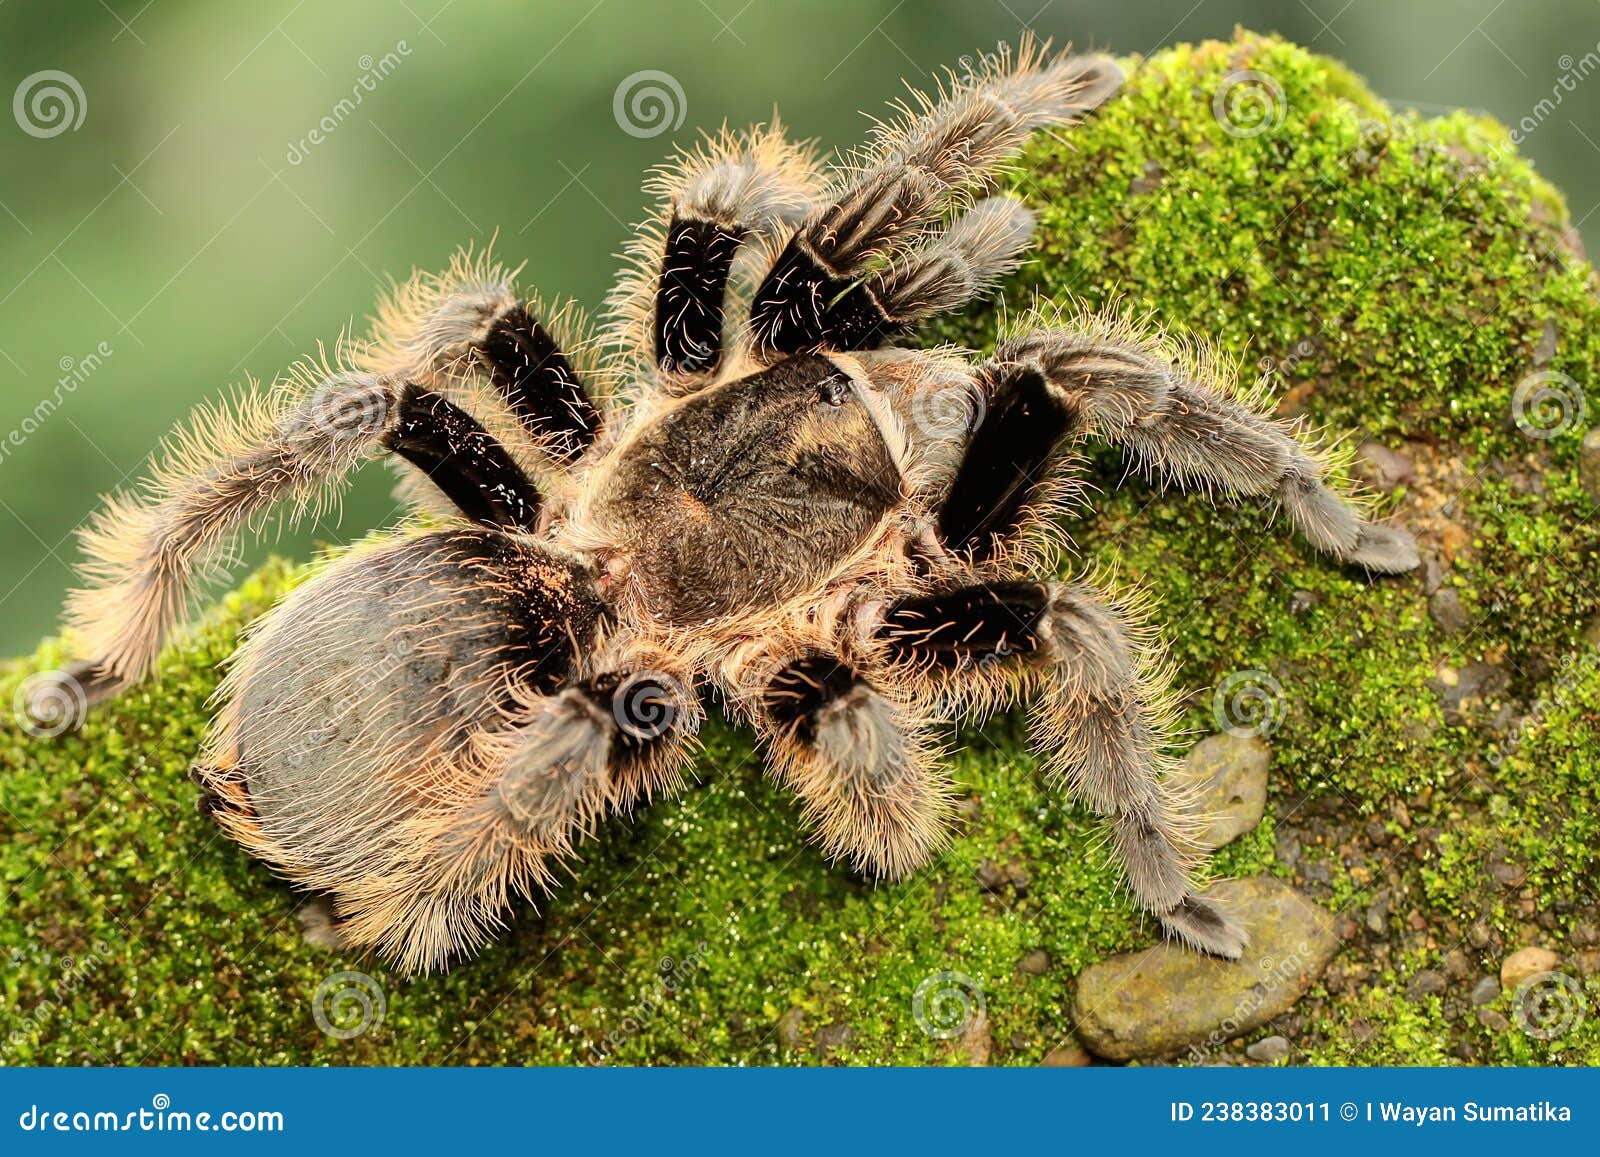 A Black Tarantula Looking for Prey in the Bushes. Stock Image - Image ...